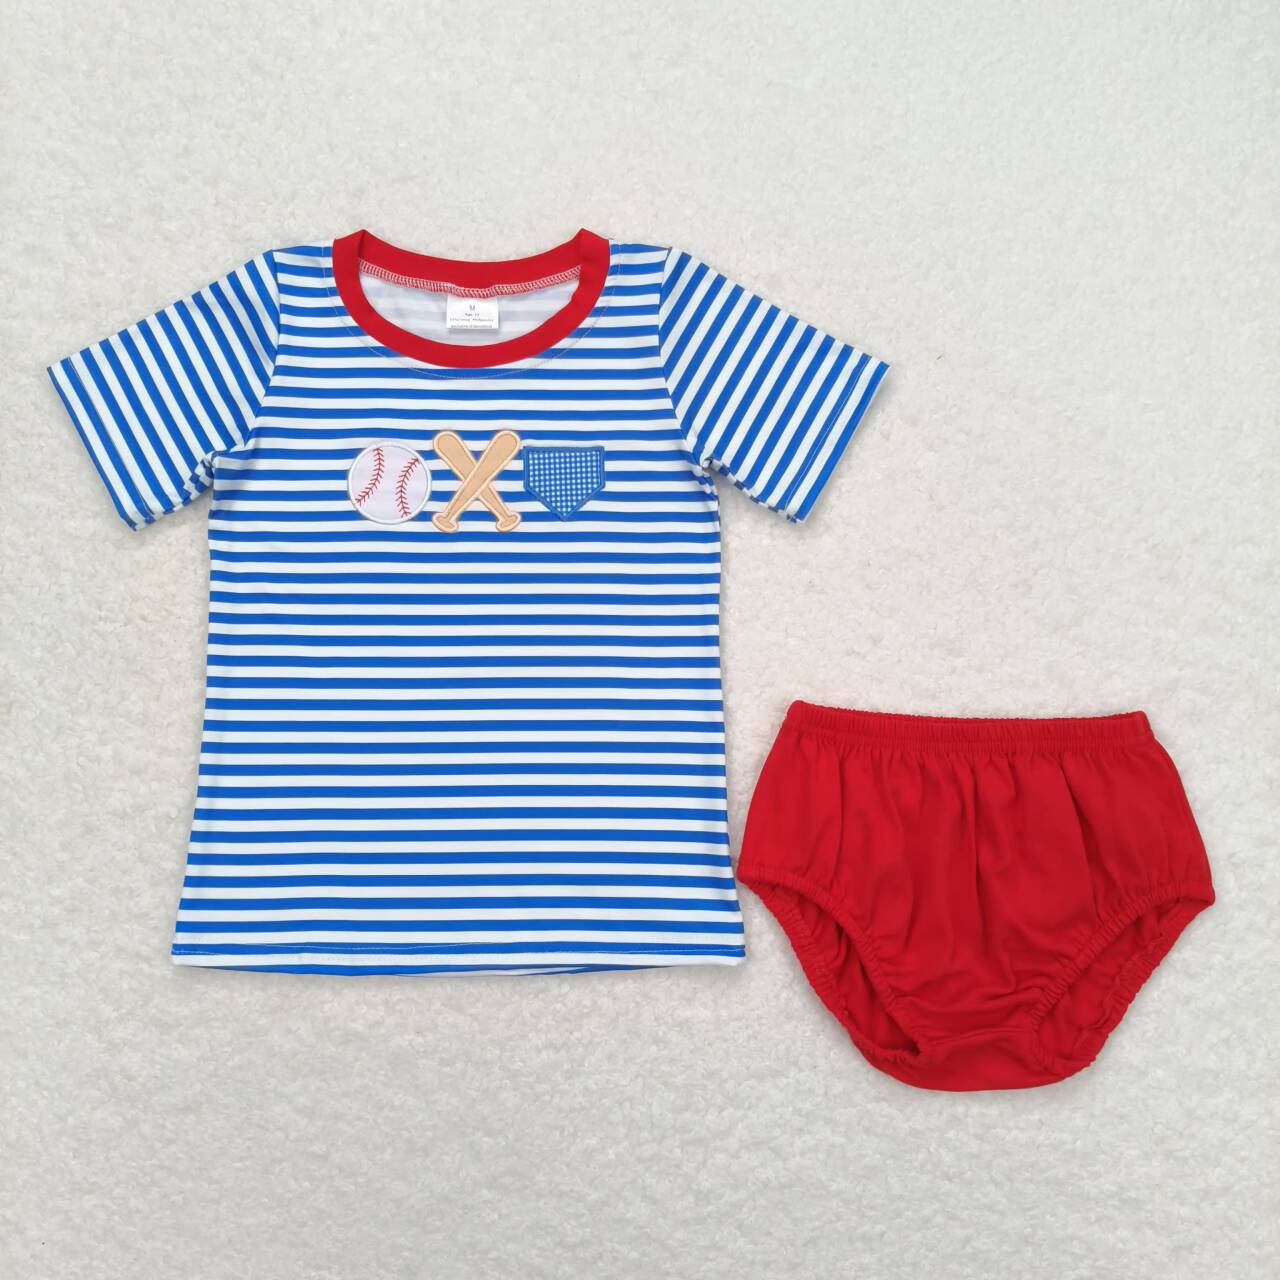 GBO0355 Baseball Embroidery Stripes Top Red Shorts Baby Boys Summer Bummie Set